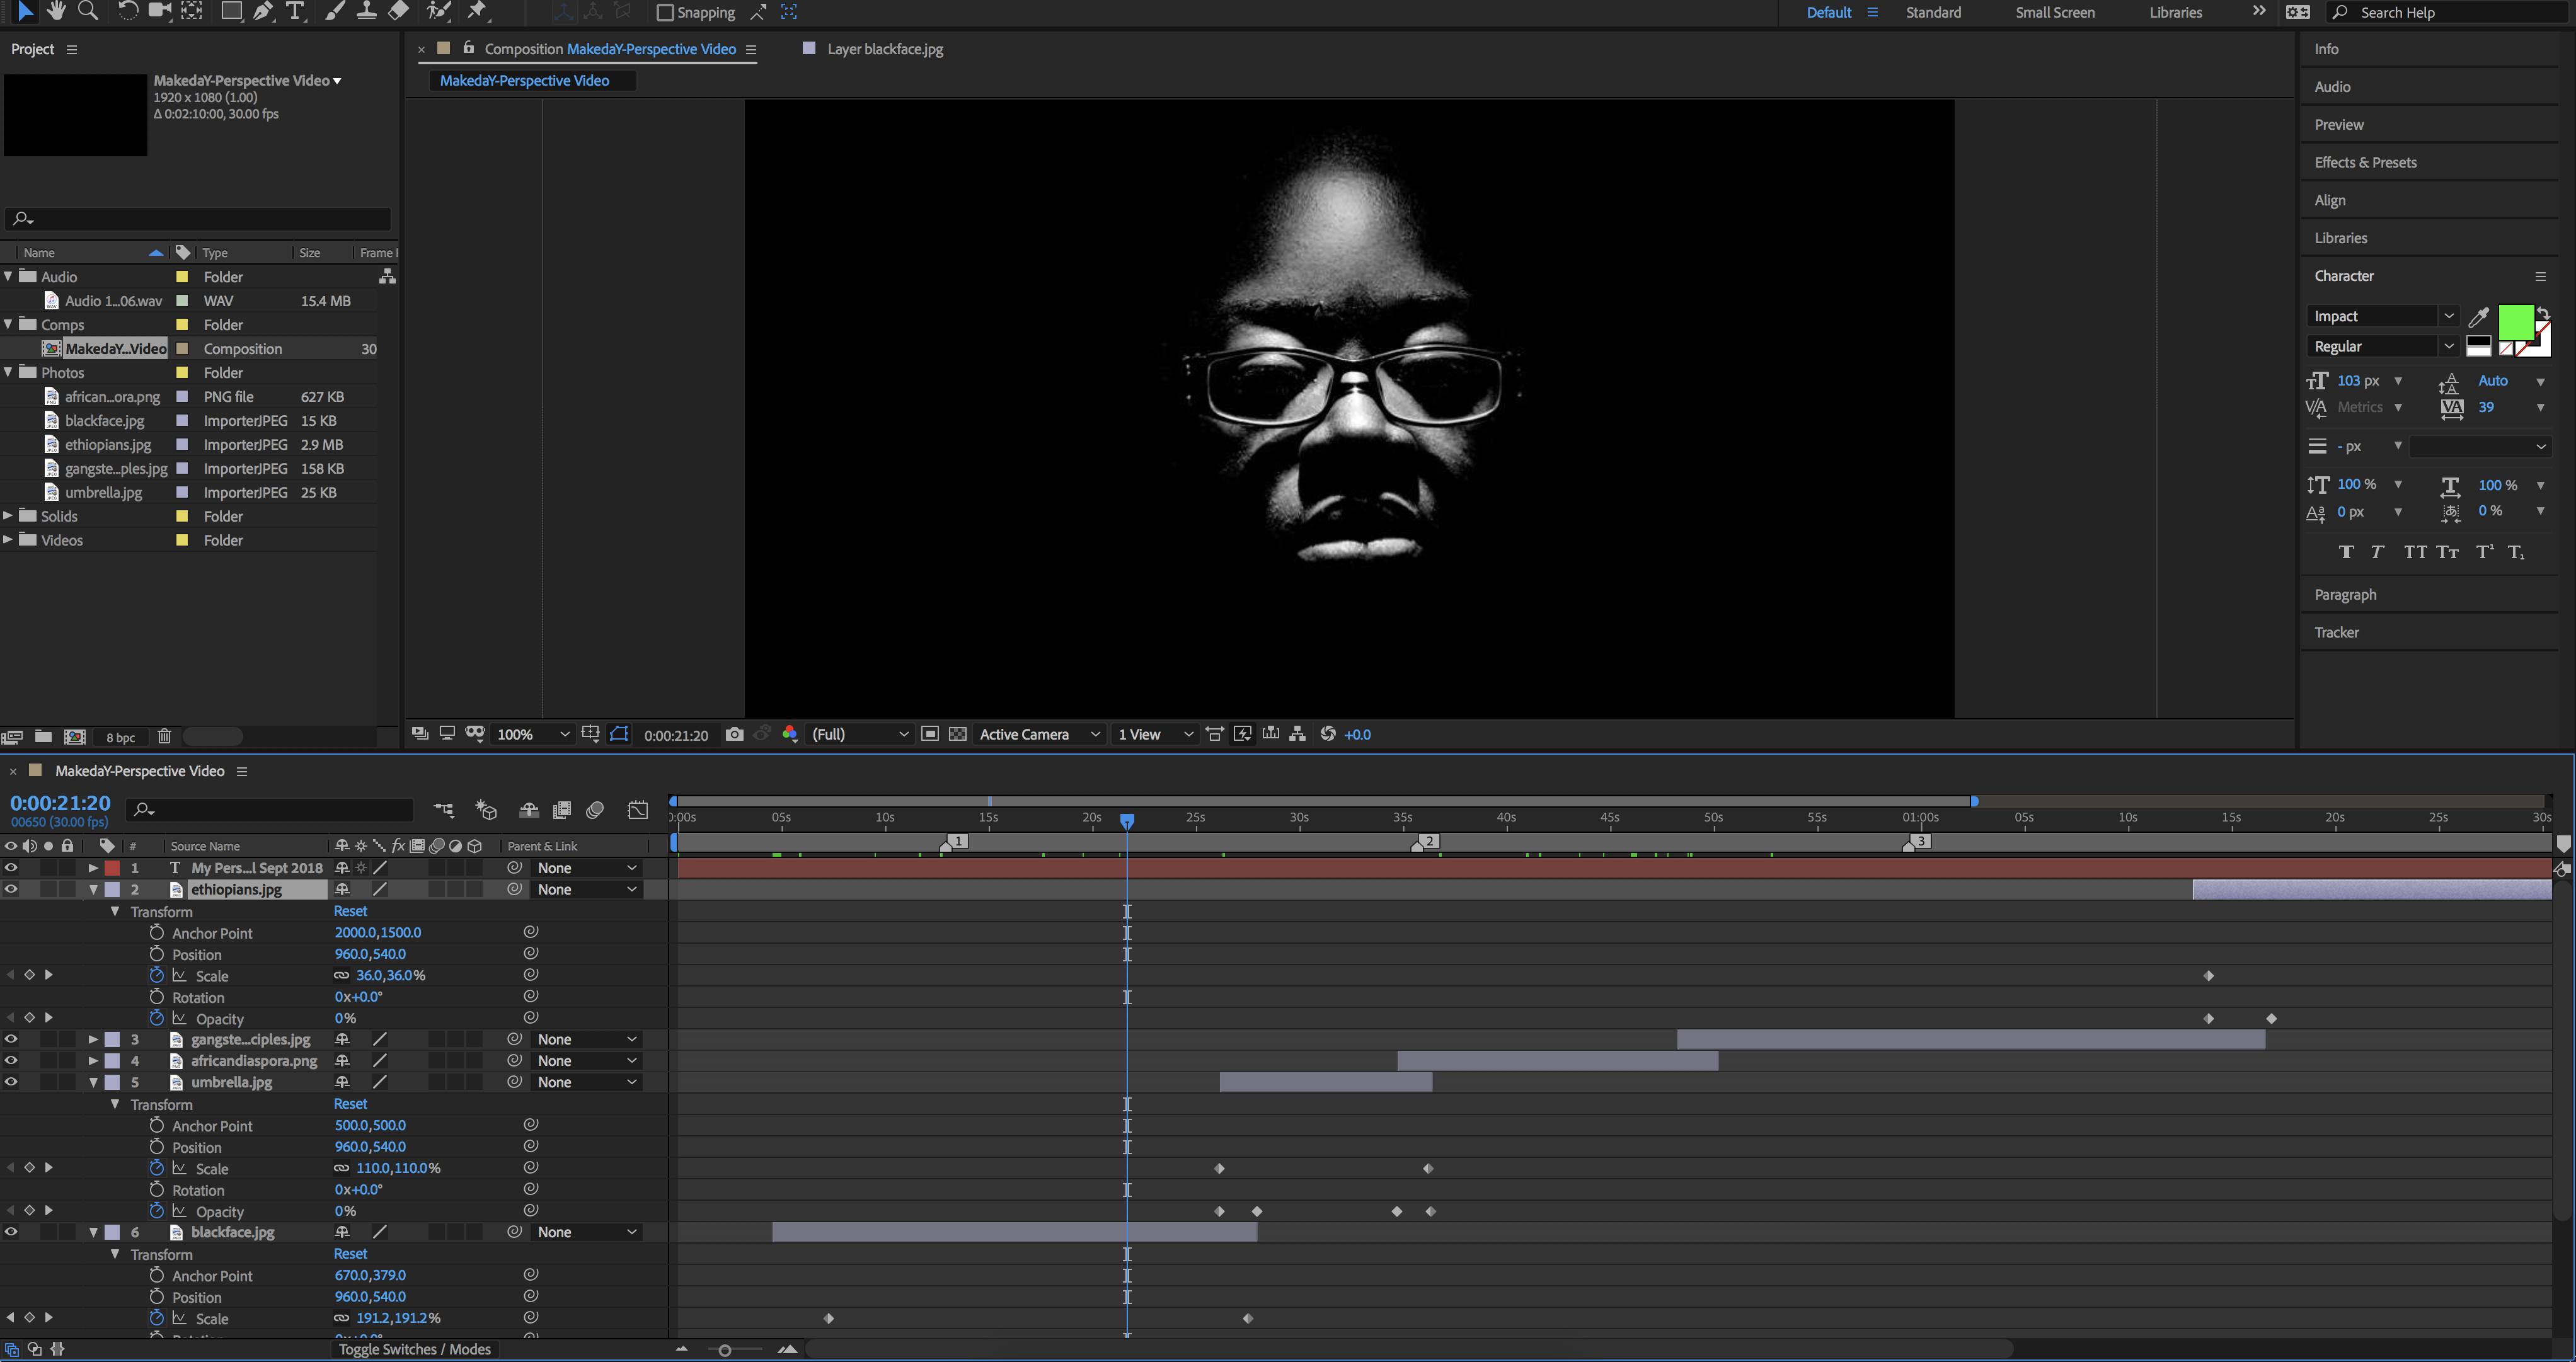 This screenshot shows the production of my perspective video in After Effects.